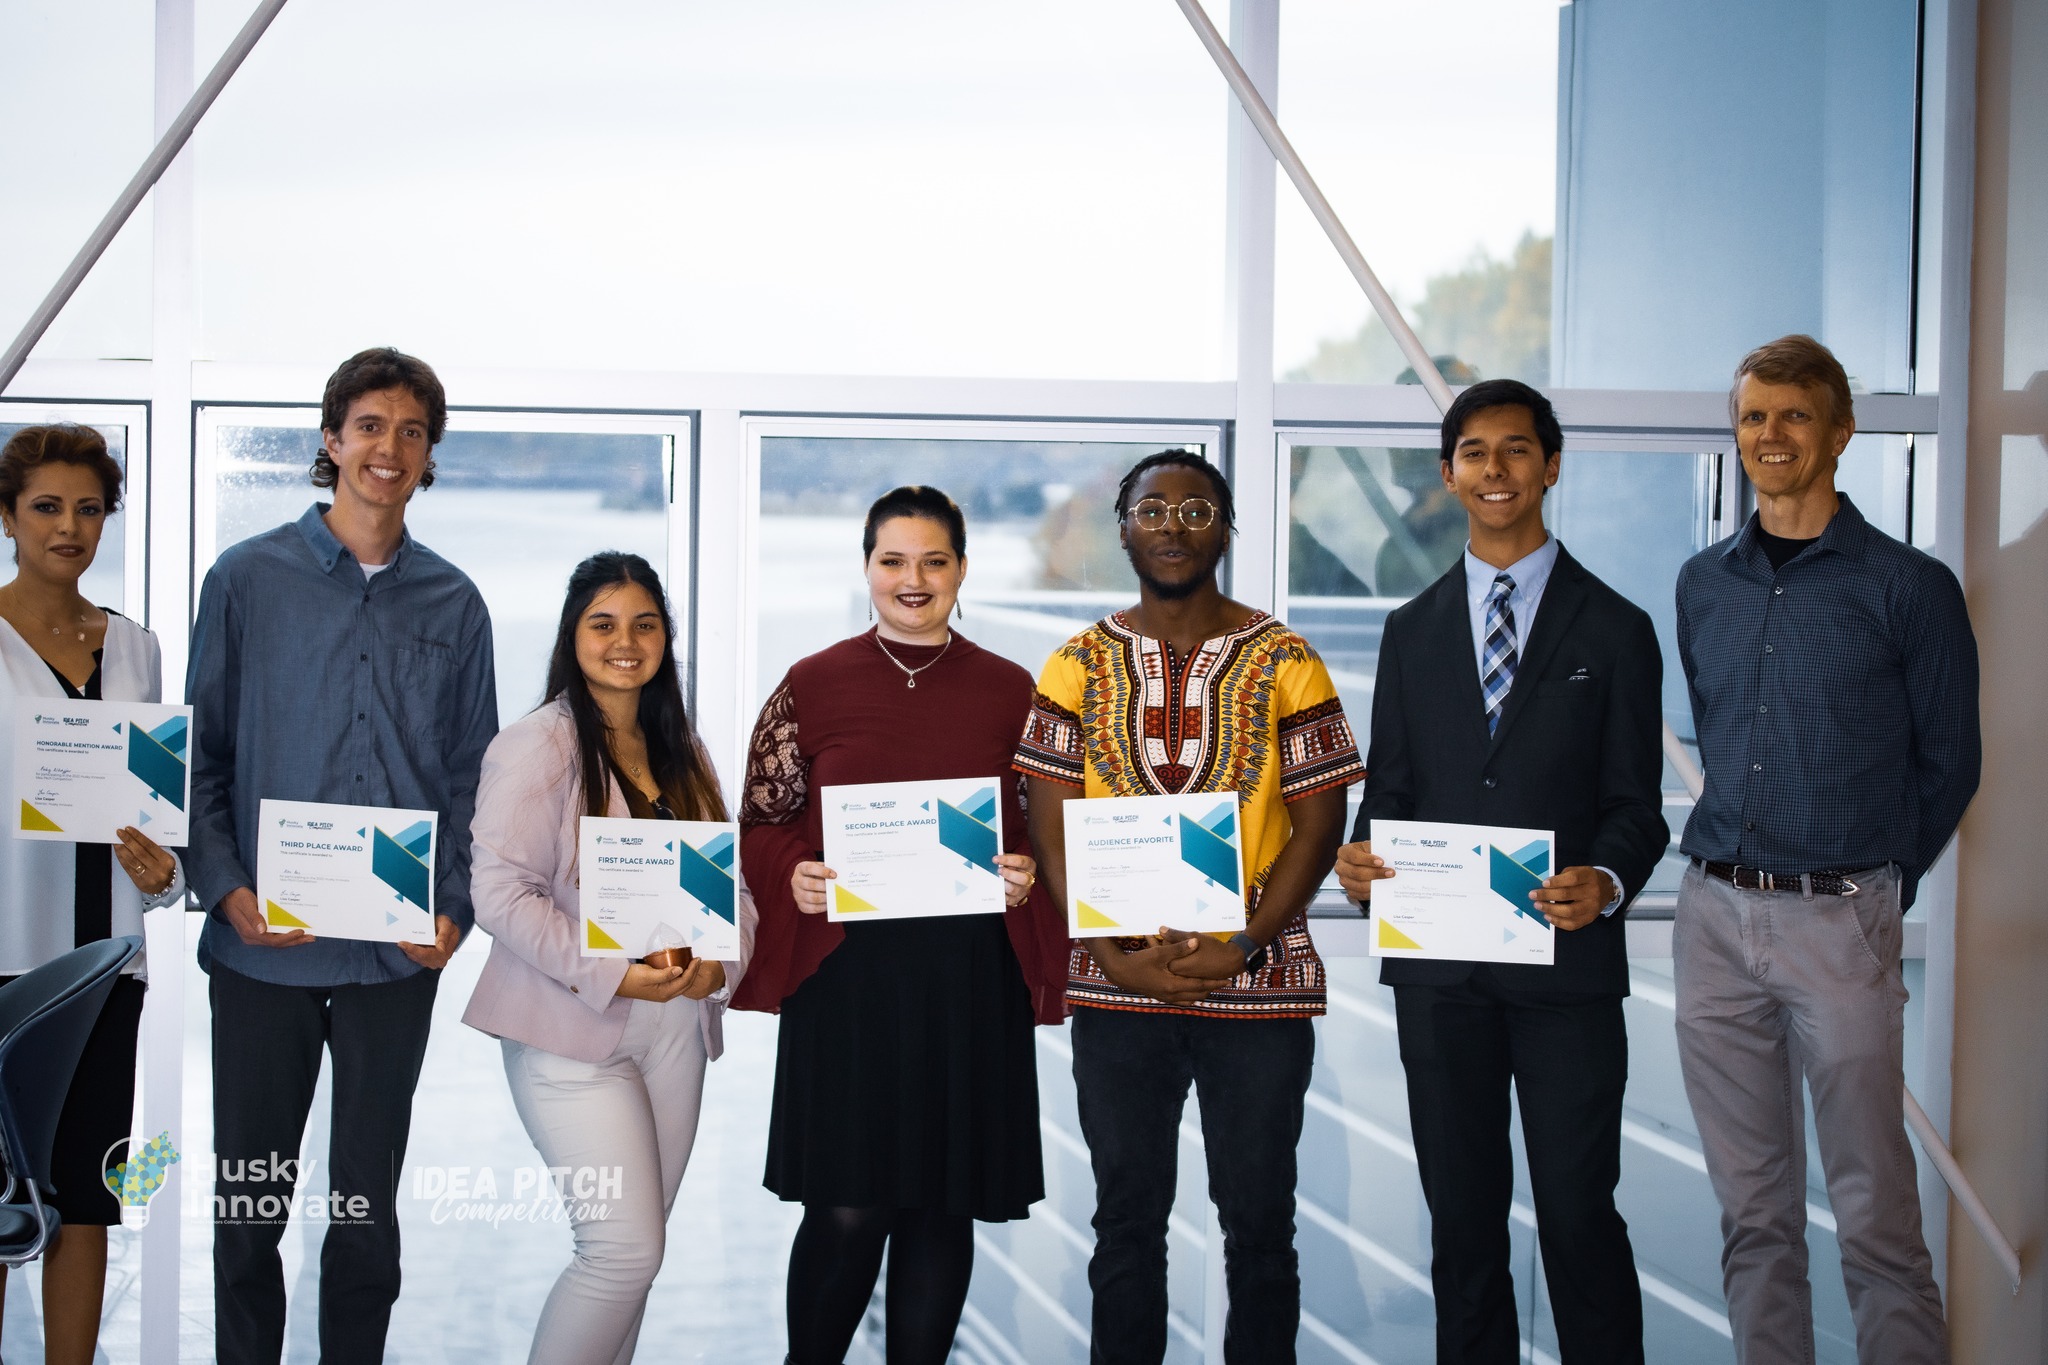 Students winners of the Idea Pitch Competition pose with certificates. 